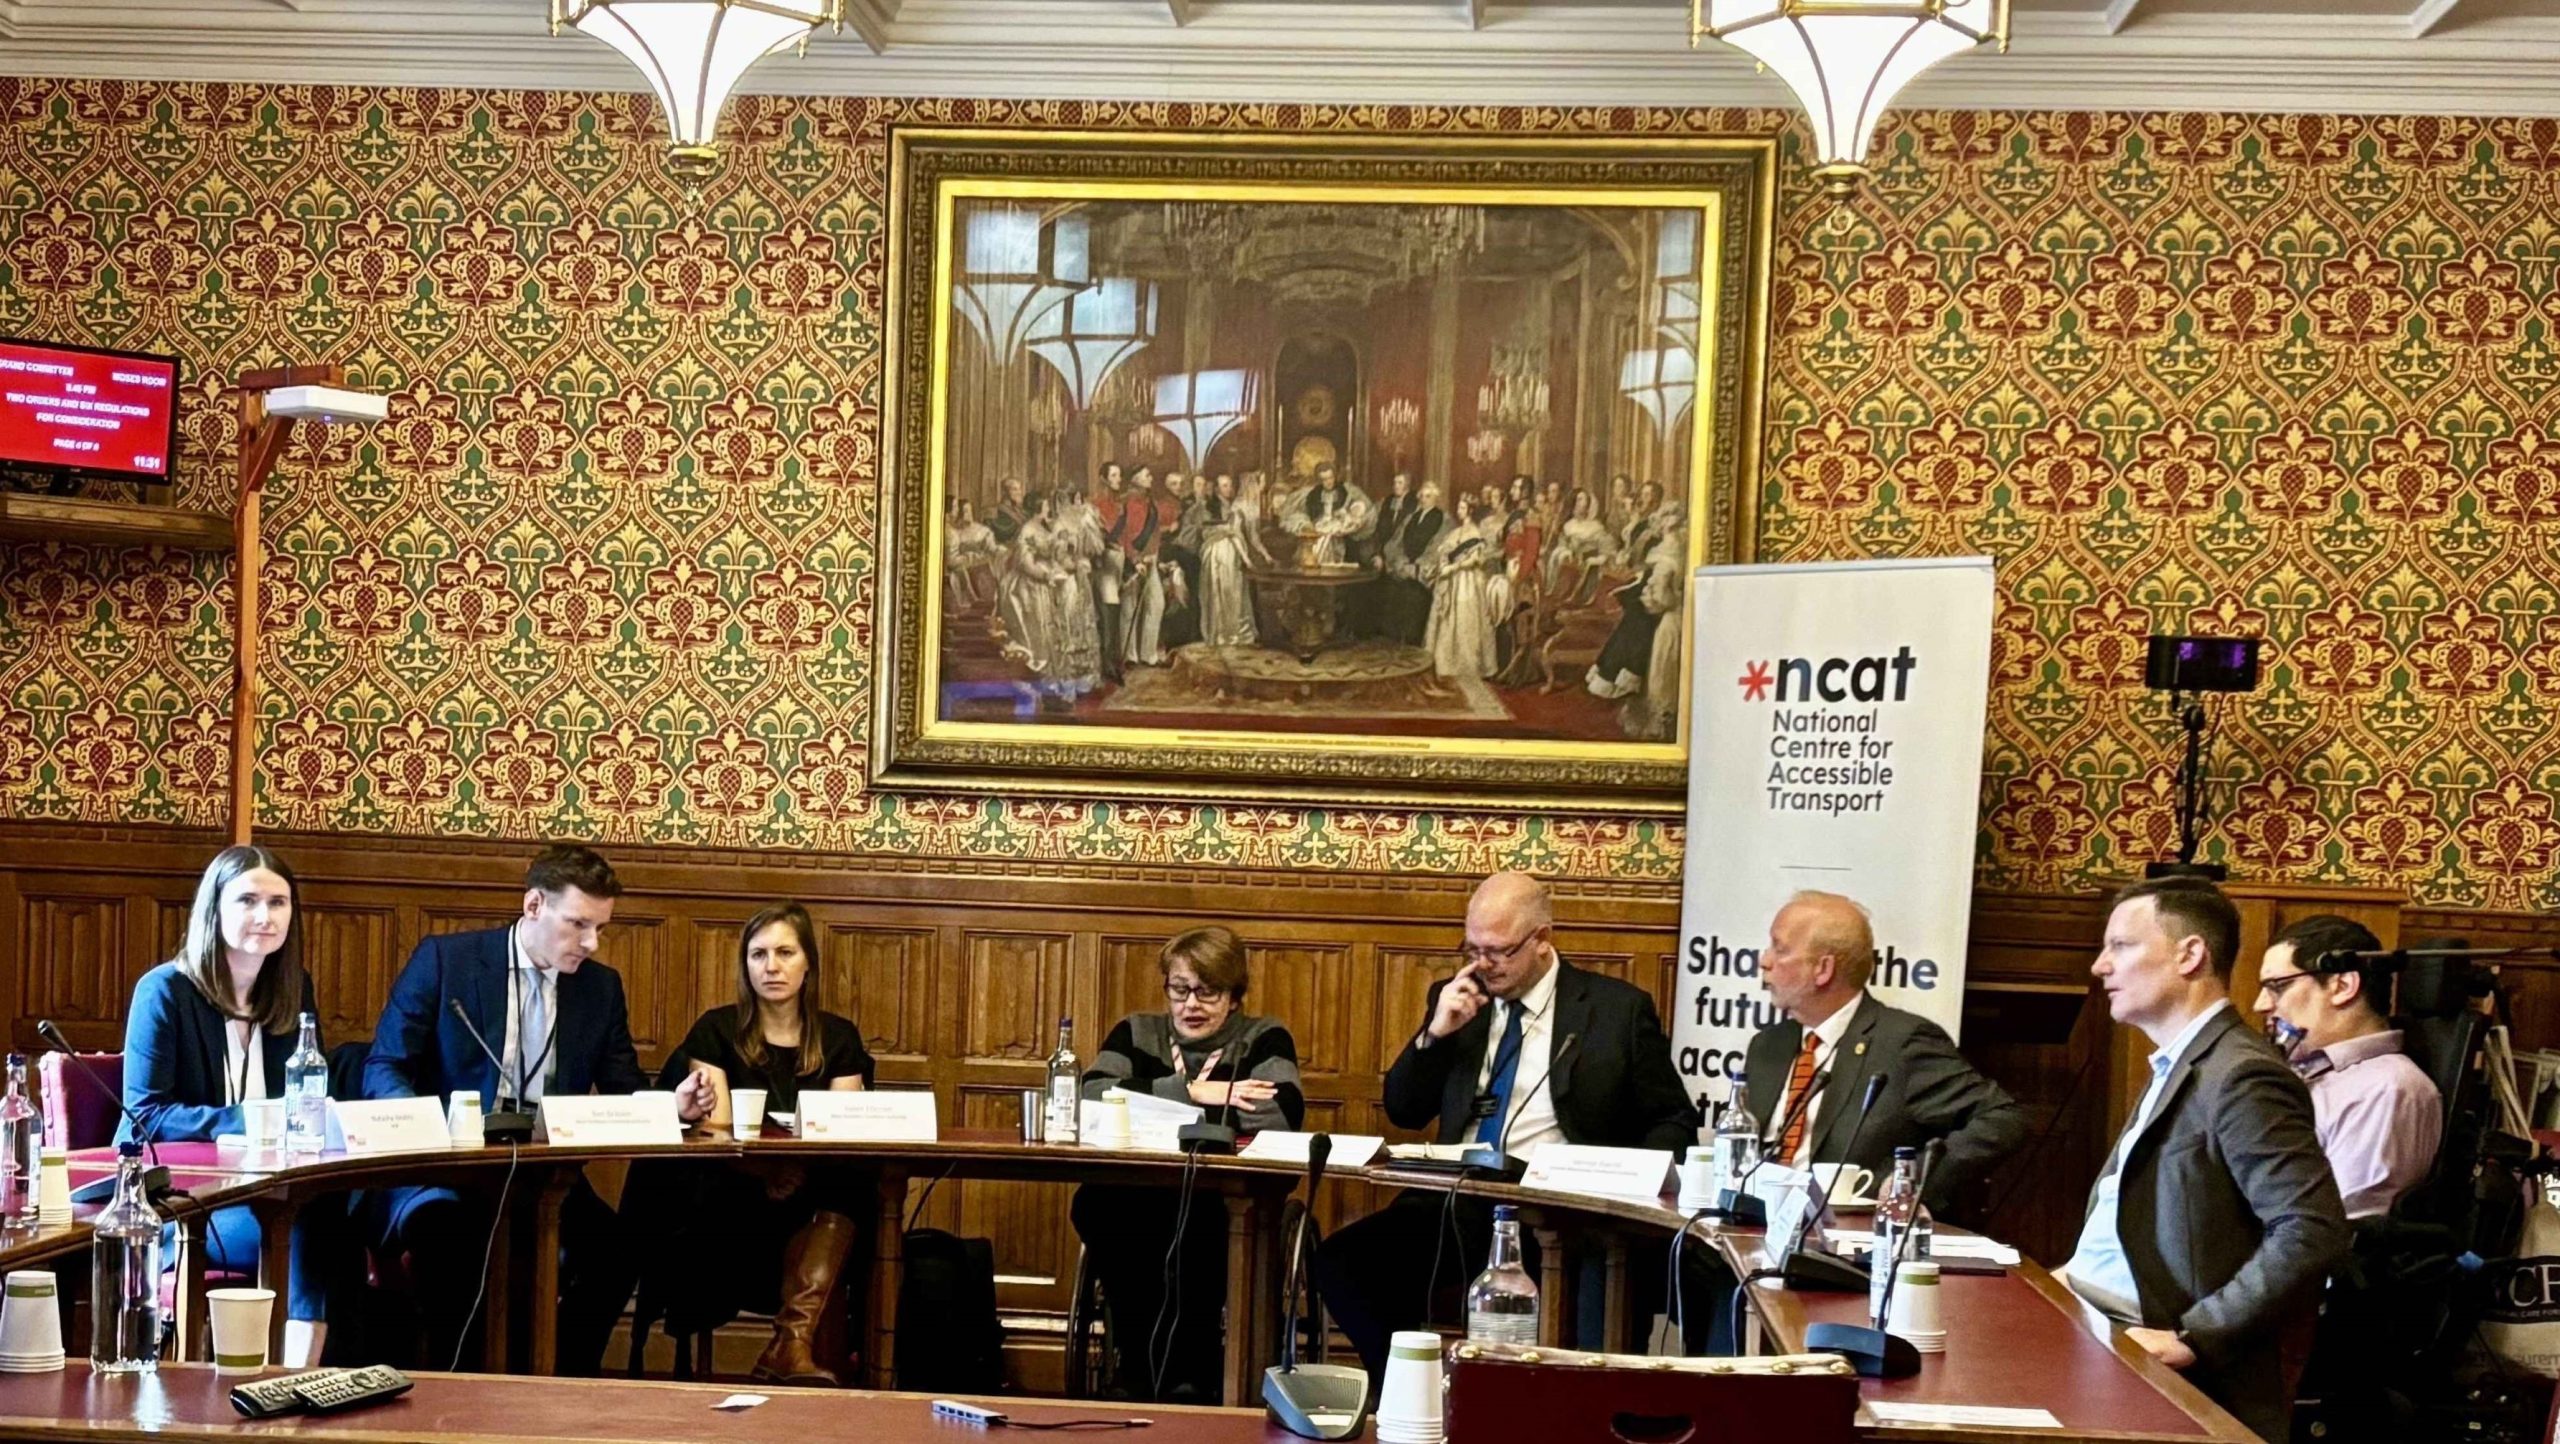 The Accessible Transport Policy Commission roundtable in a grand room in the House of Lords.